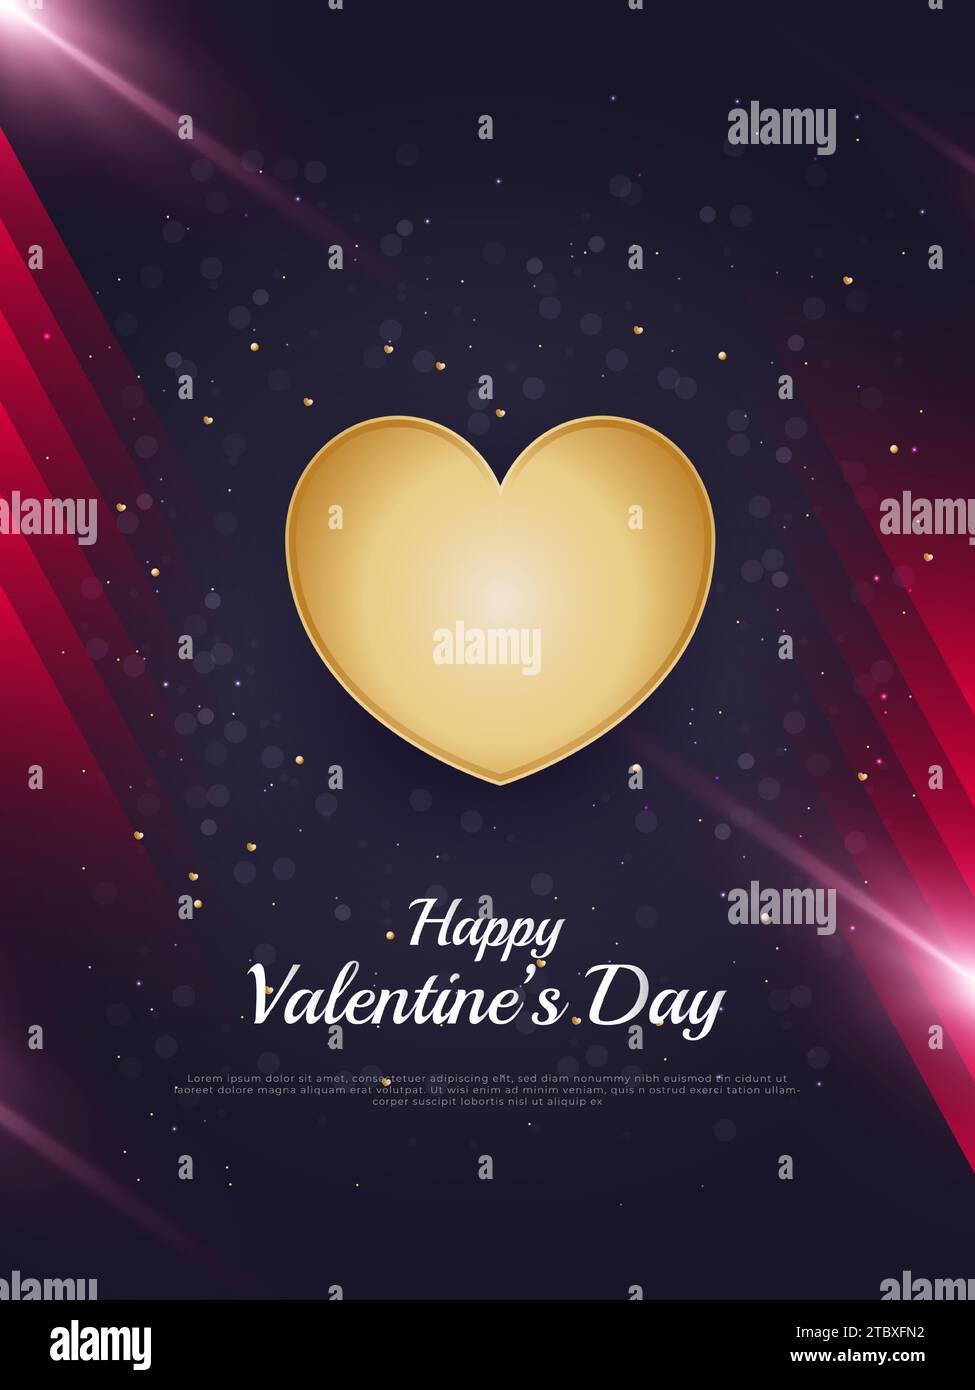 Happy Valentine's Day greeting card with 3d gold hearts and glitter effect on dark background. Holiday gift card Stock Vector